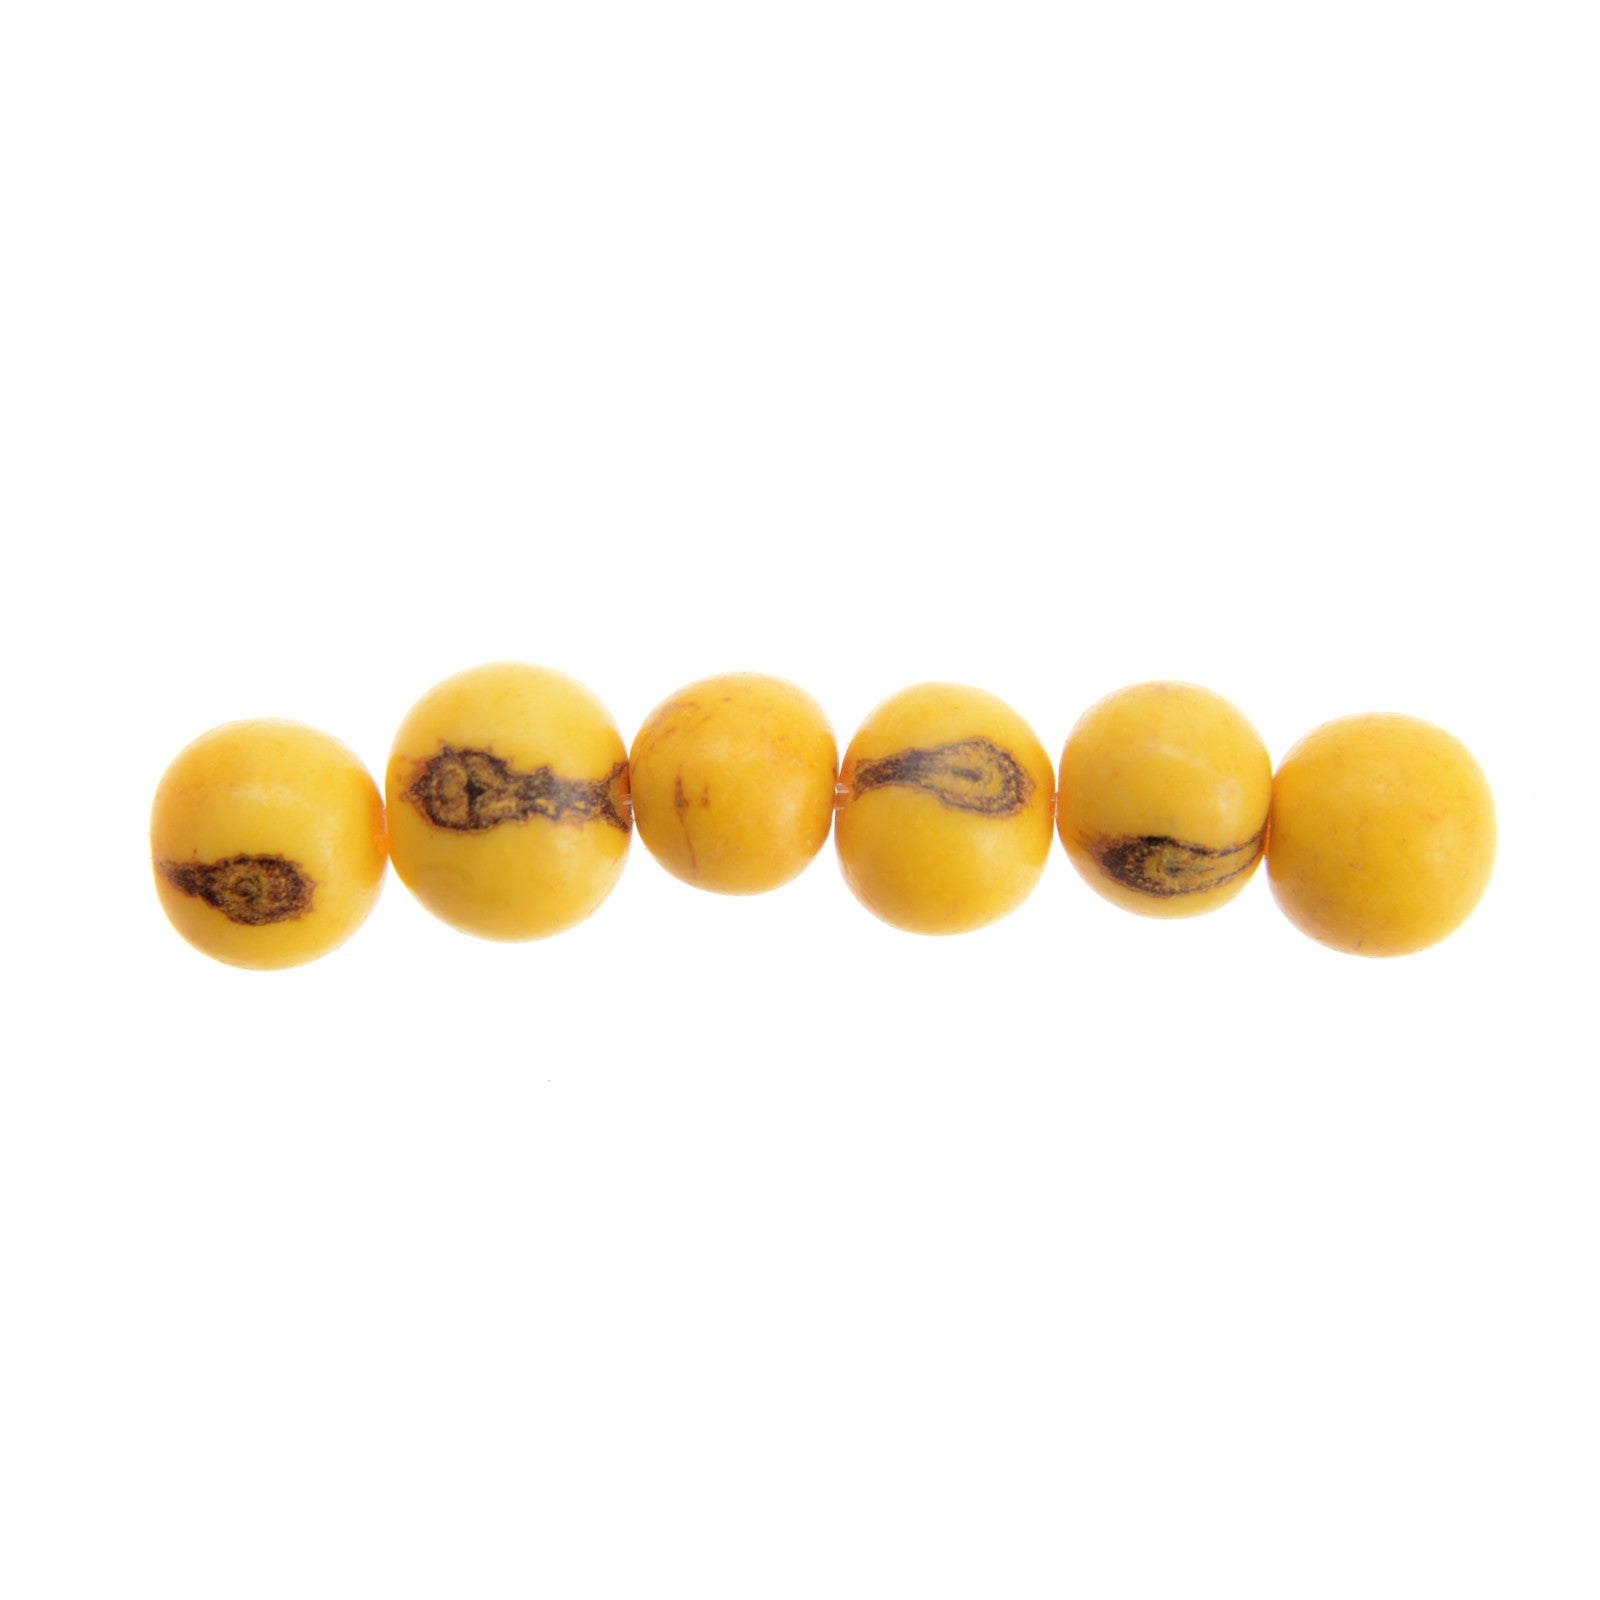 Acai Seeds Of Life Bracelet with Wax Seal - Yellow - Whitney Howard Designs